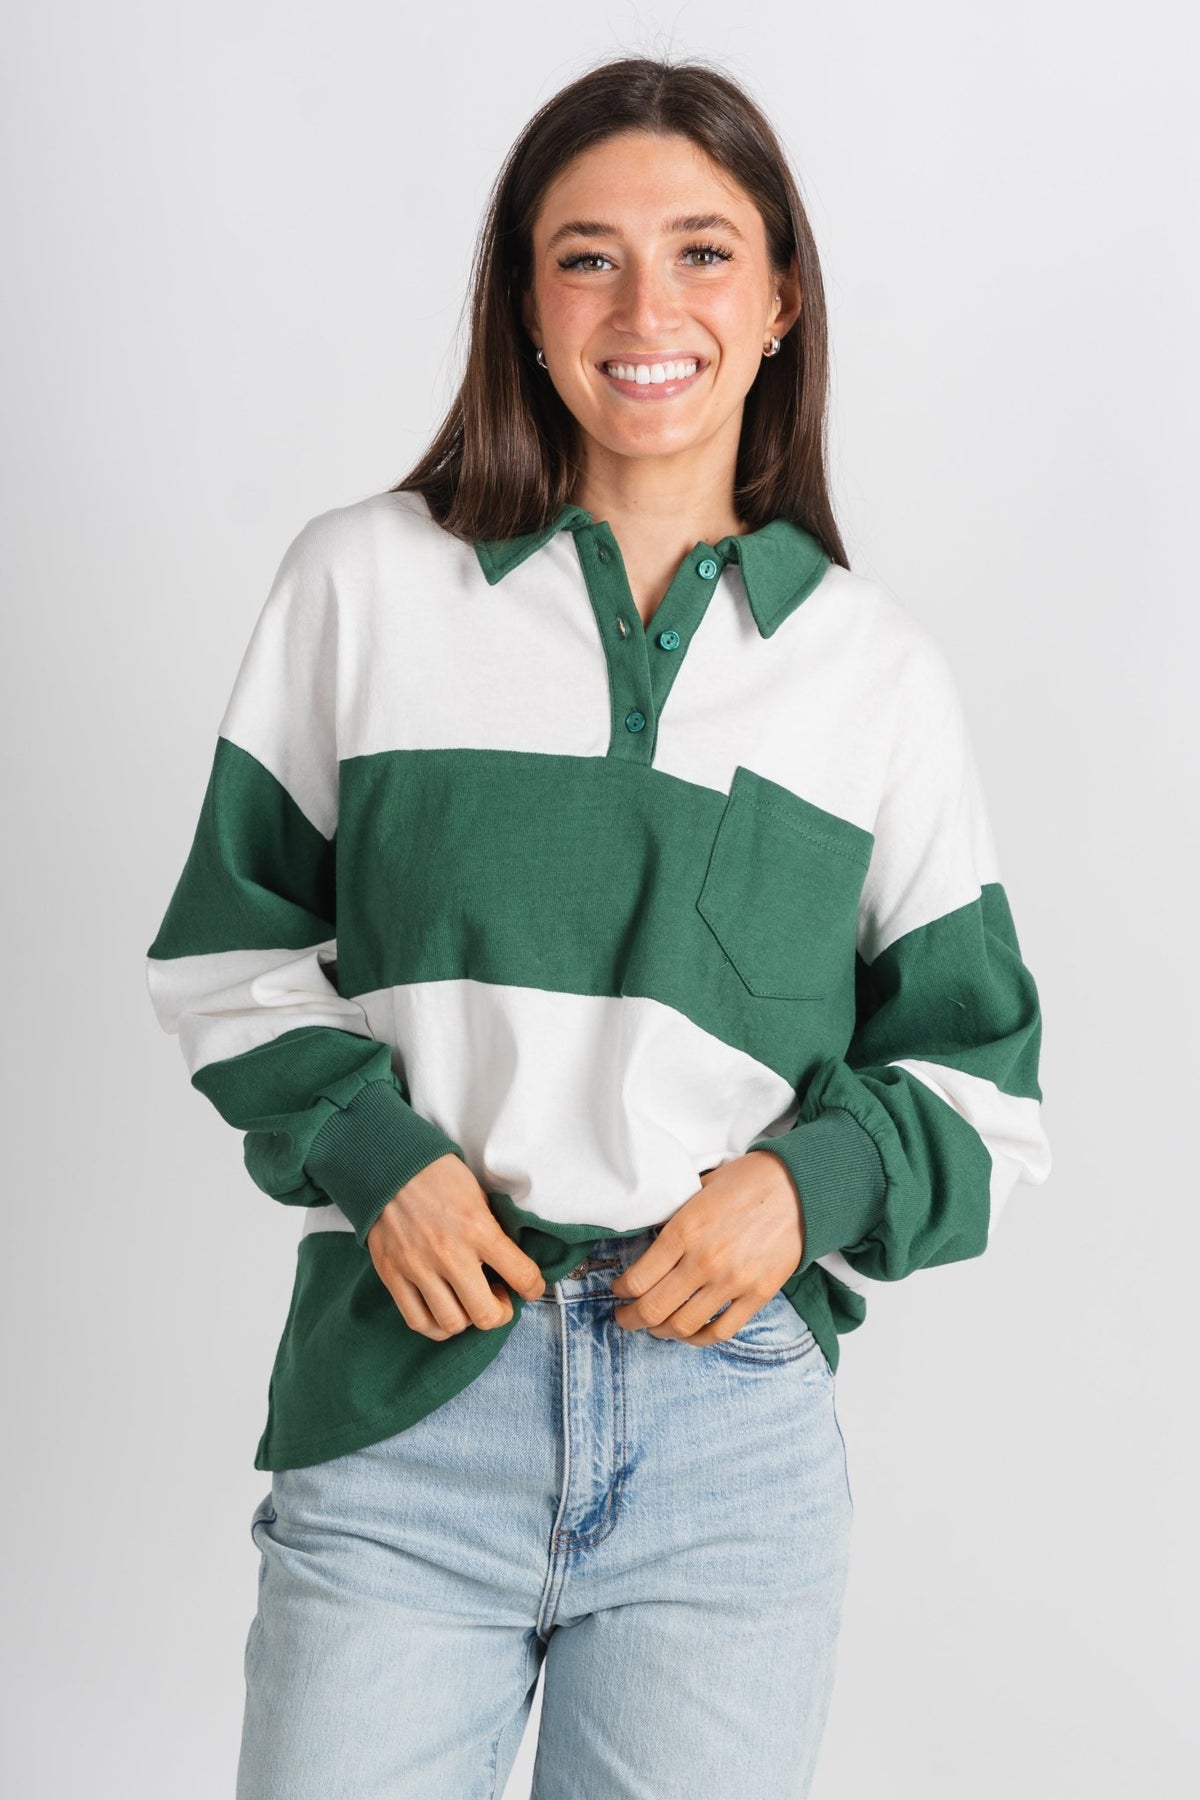 Striped collared polo top green/white - Trendy T-Shirts for St. Patrick's Day at Lush Fashion Lounge Boutique in Oklahoma City